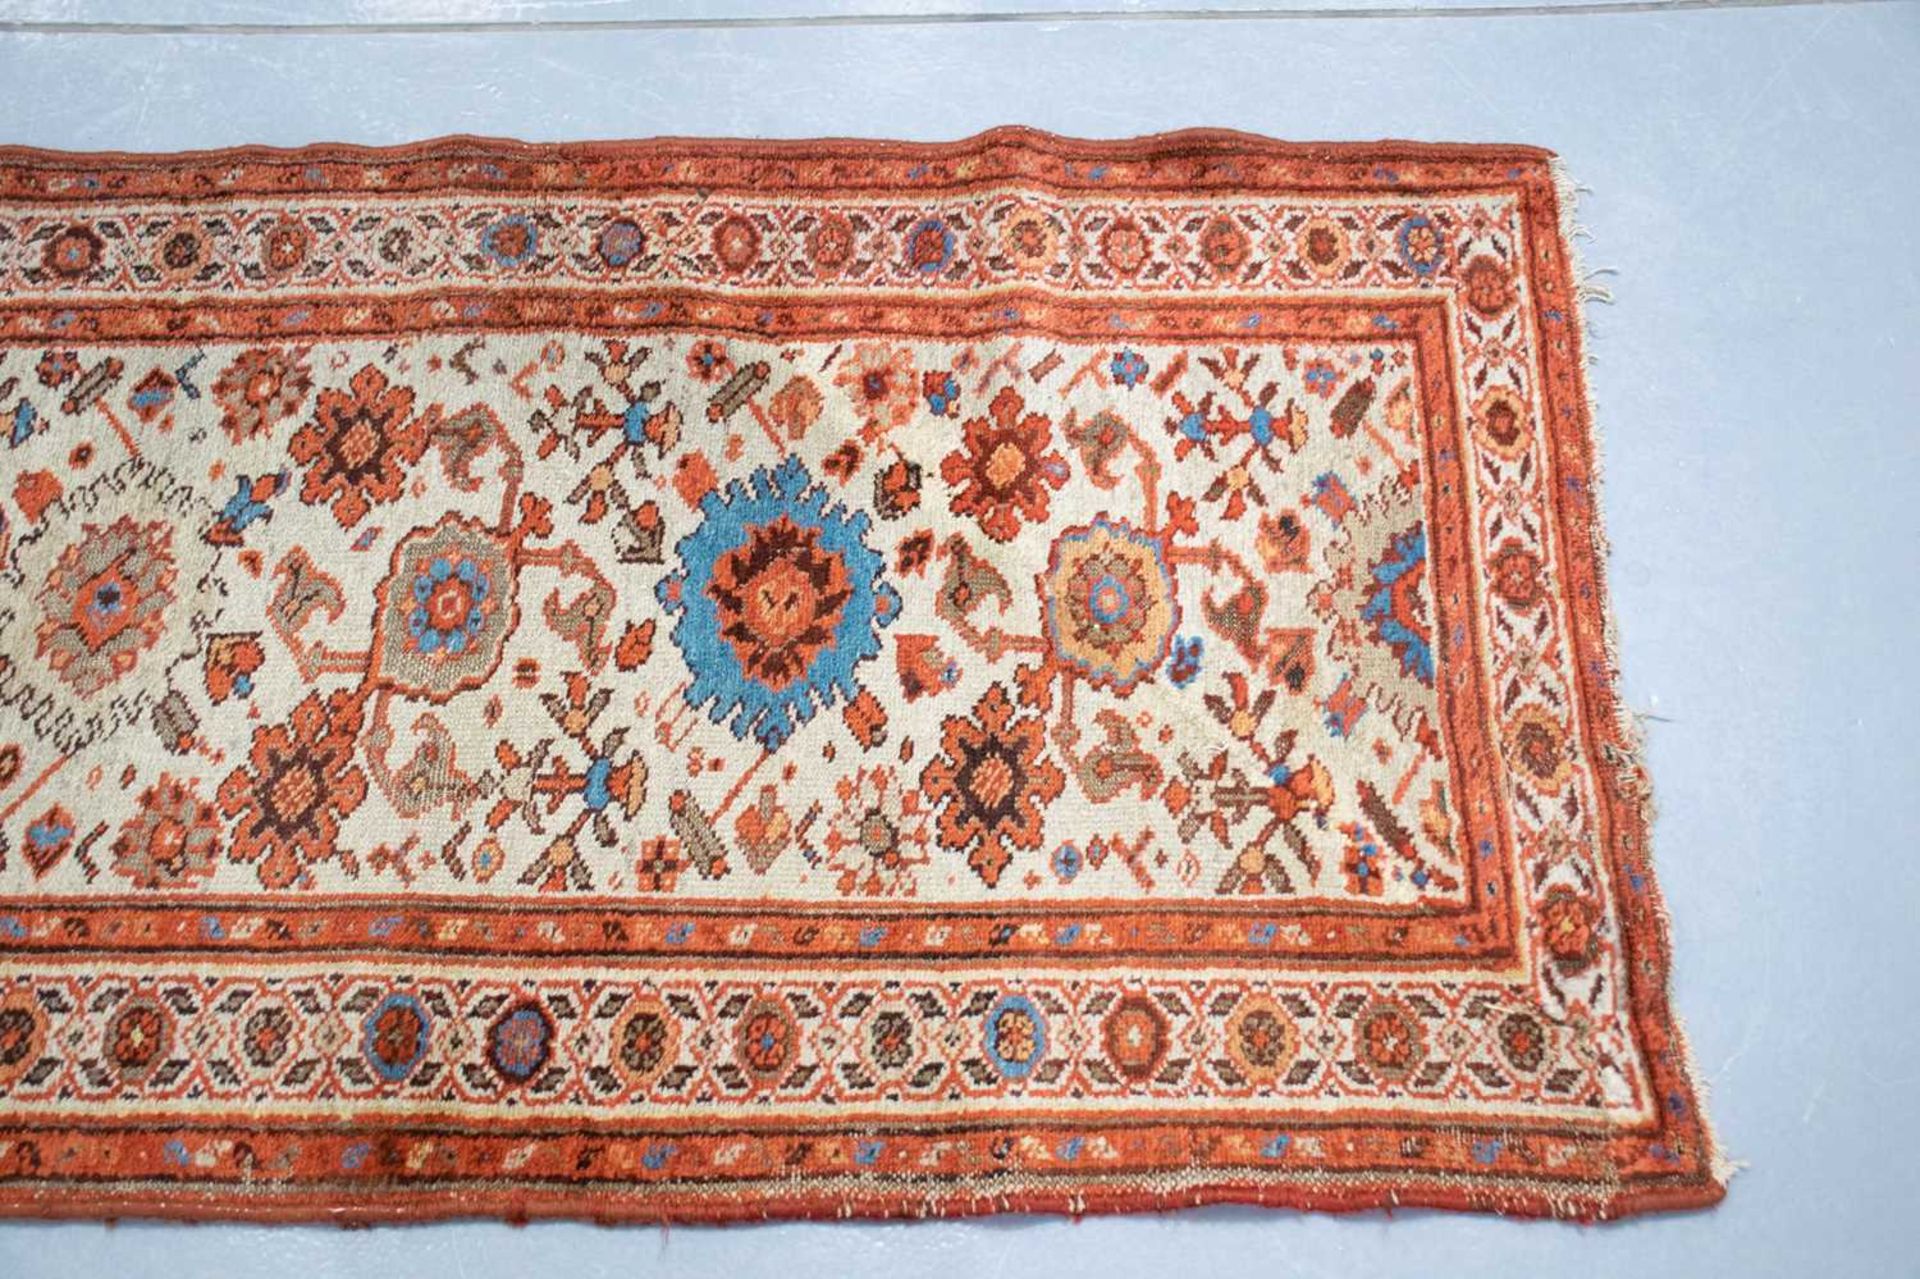 An "Old Country House" ivory ground Malayer runner with large flower heads, within a tiled border, r - Image 2 of 3